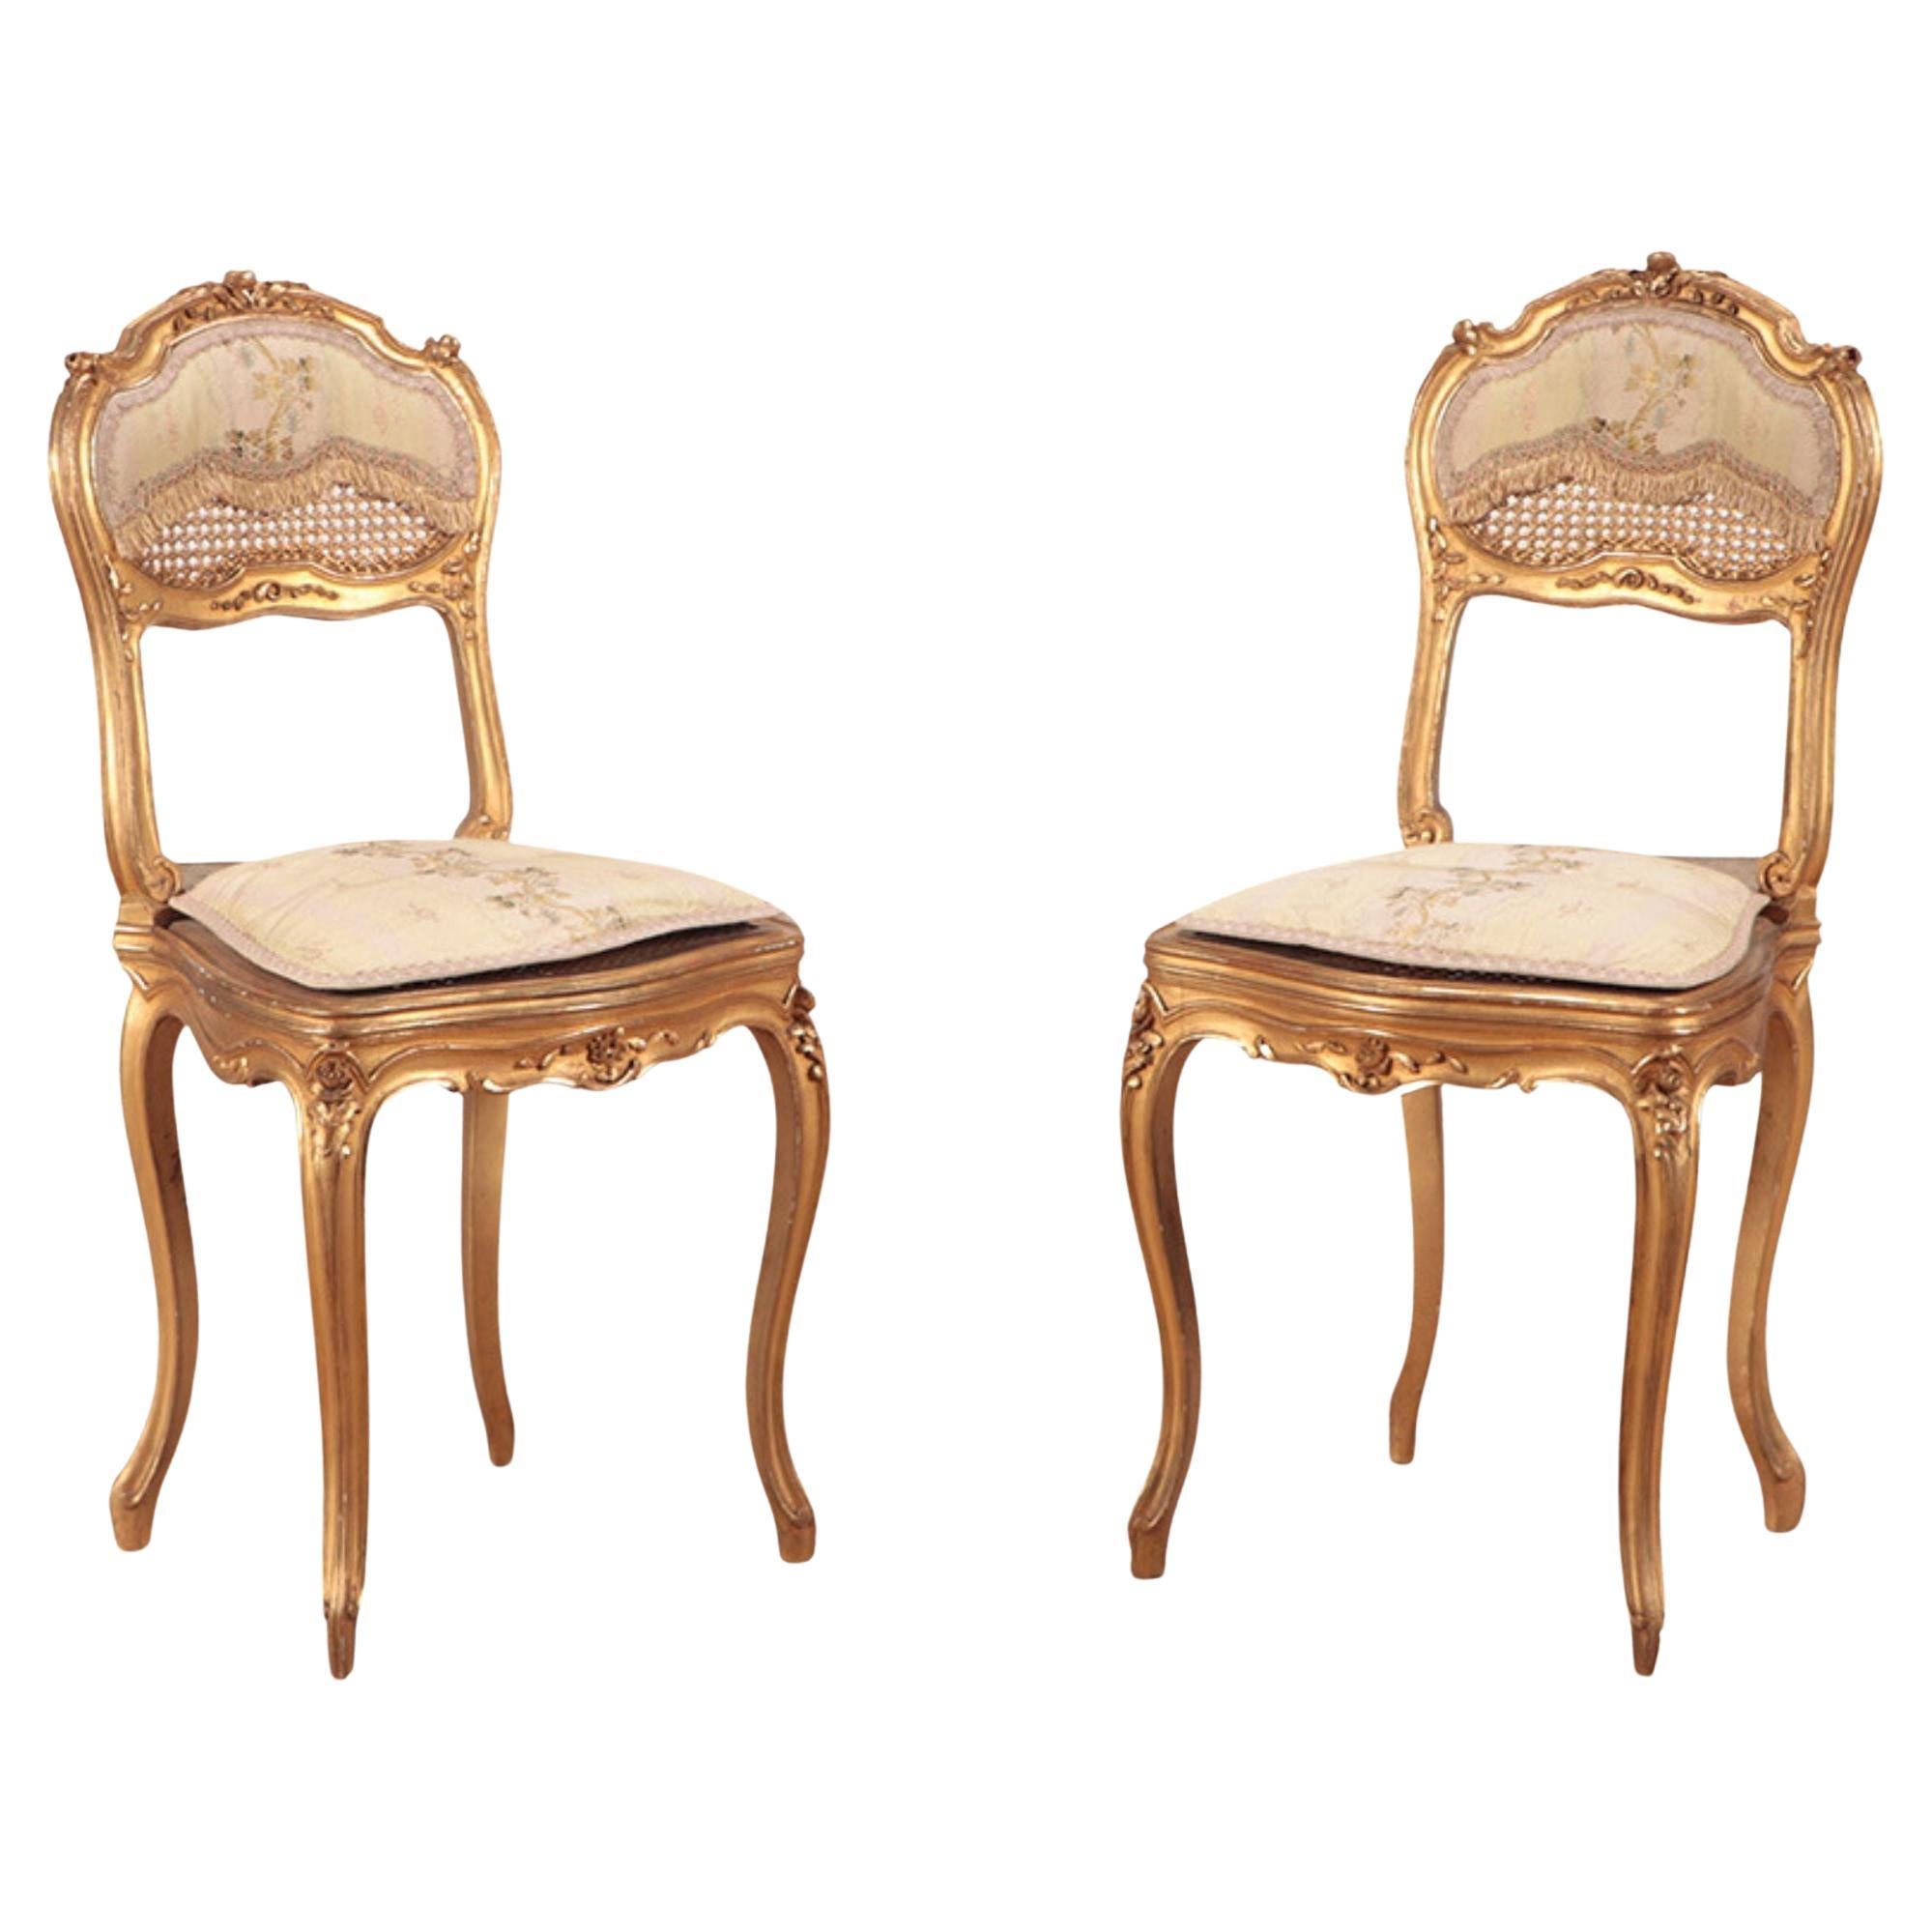 Pair of Giltwood and Carved French Louis XV Style Side Chairs, circa 1900 For Sale